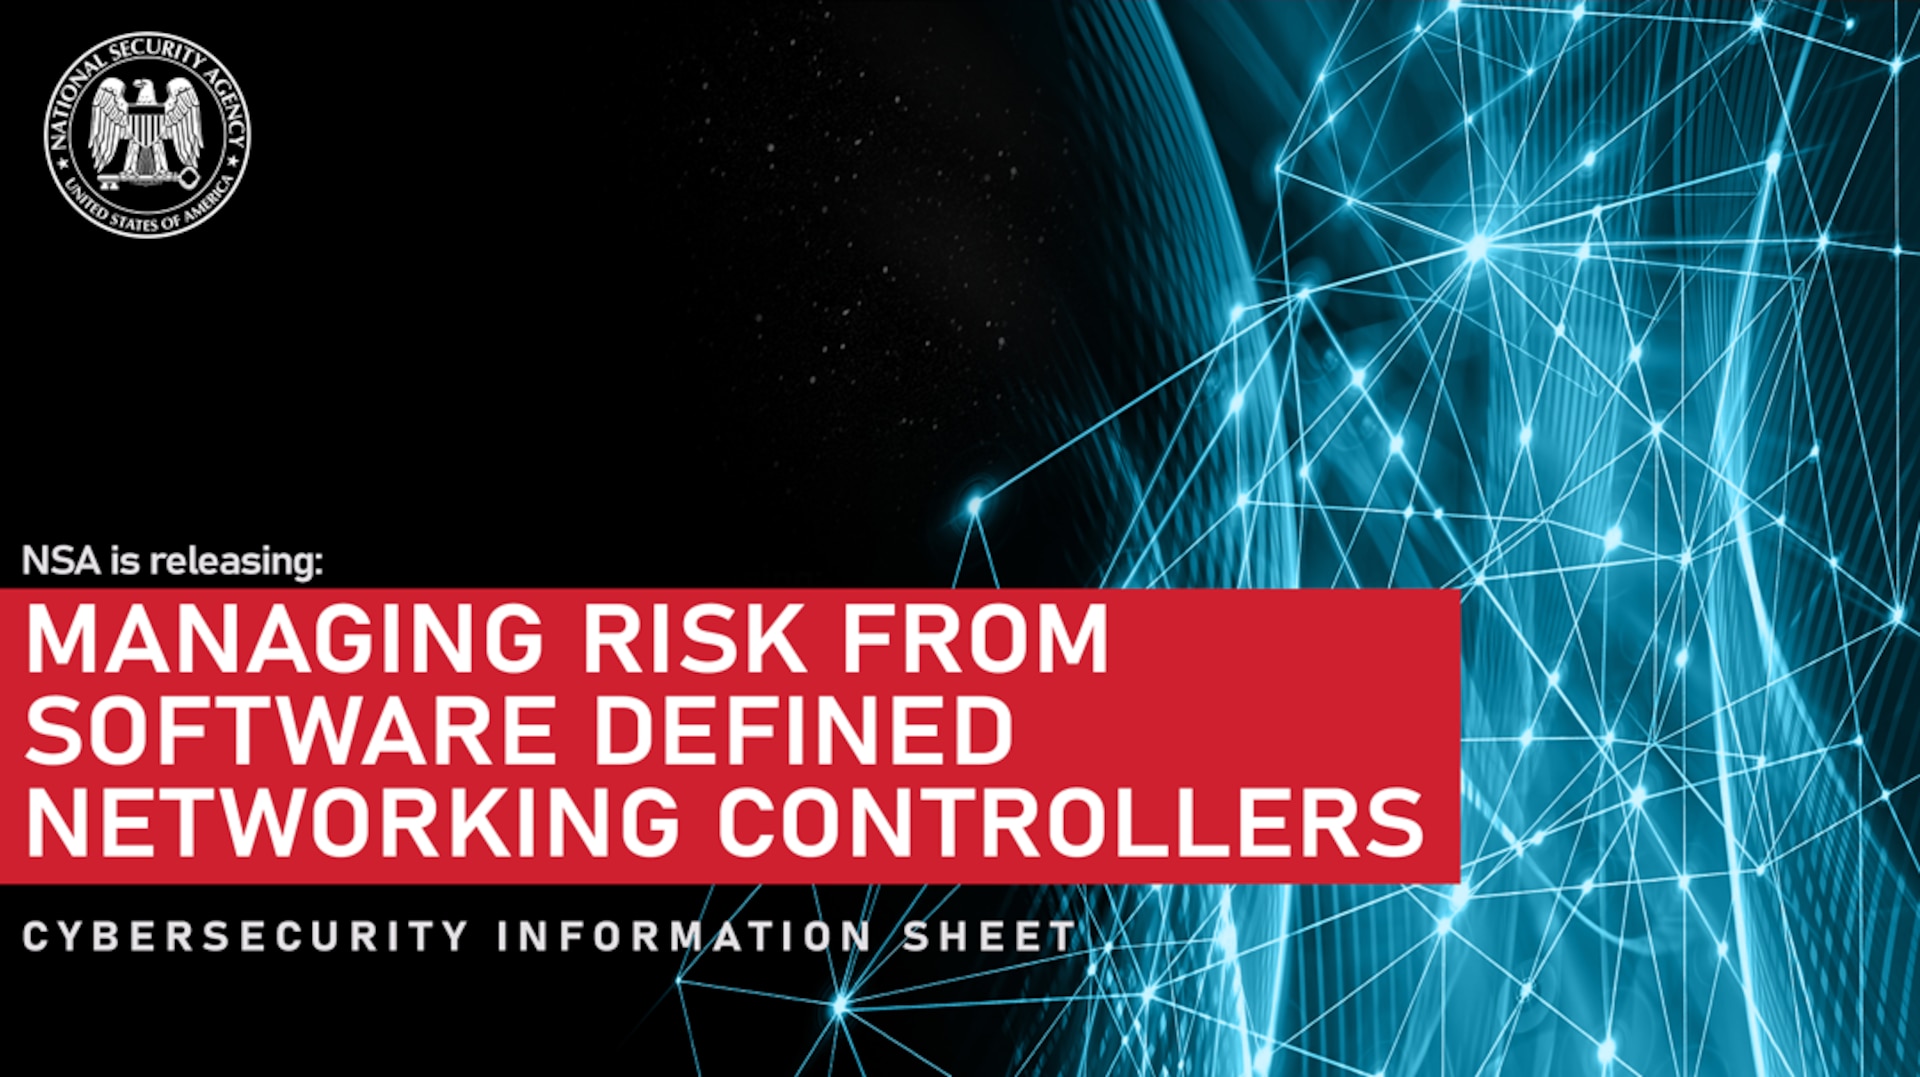 Managing Risk from Software Defined Networking Controllers